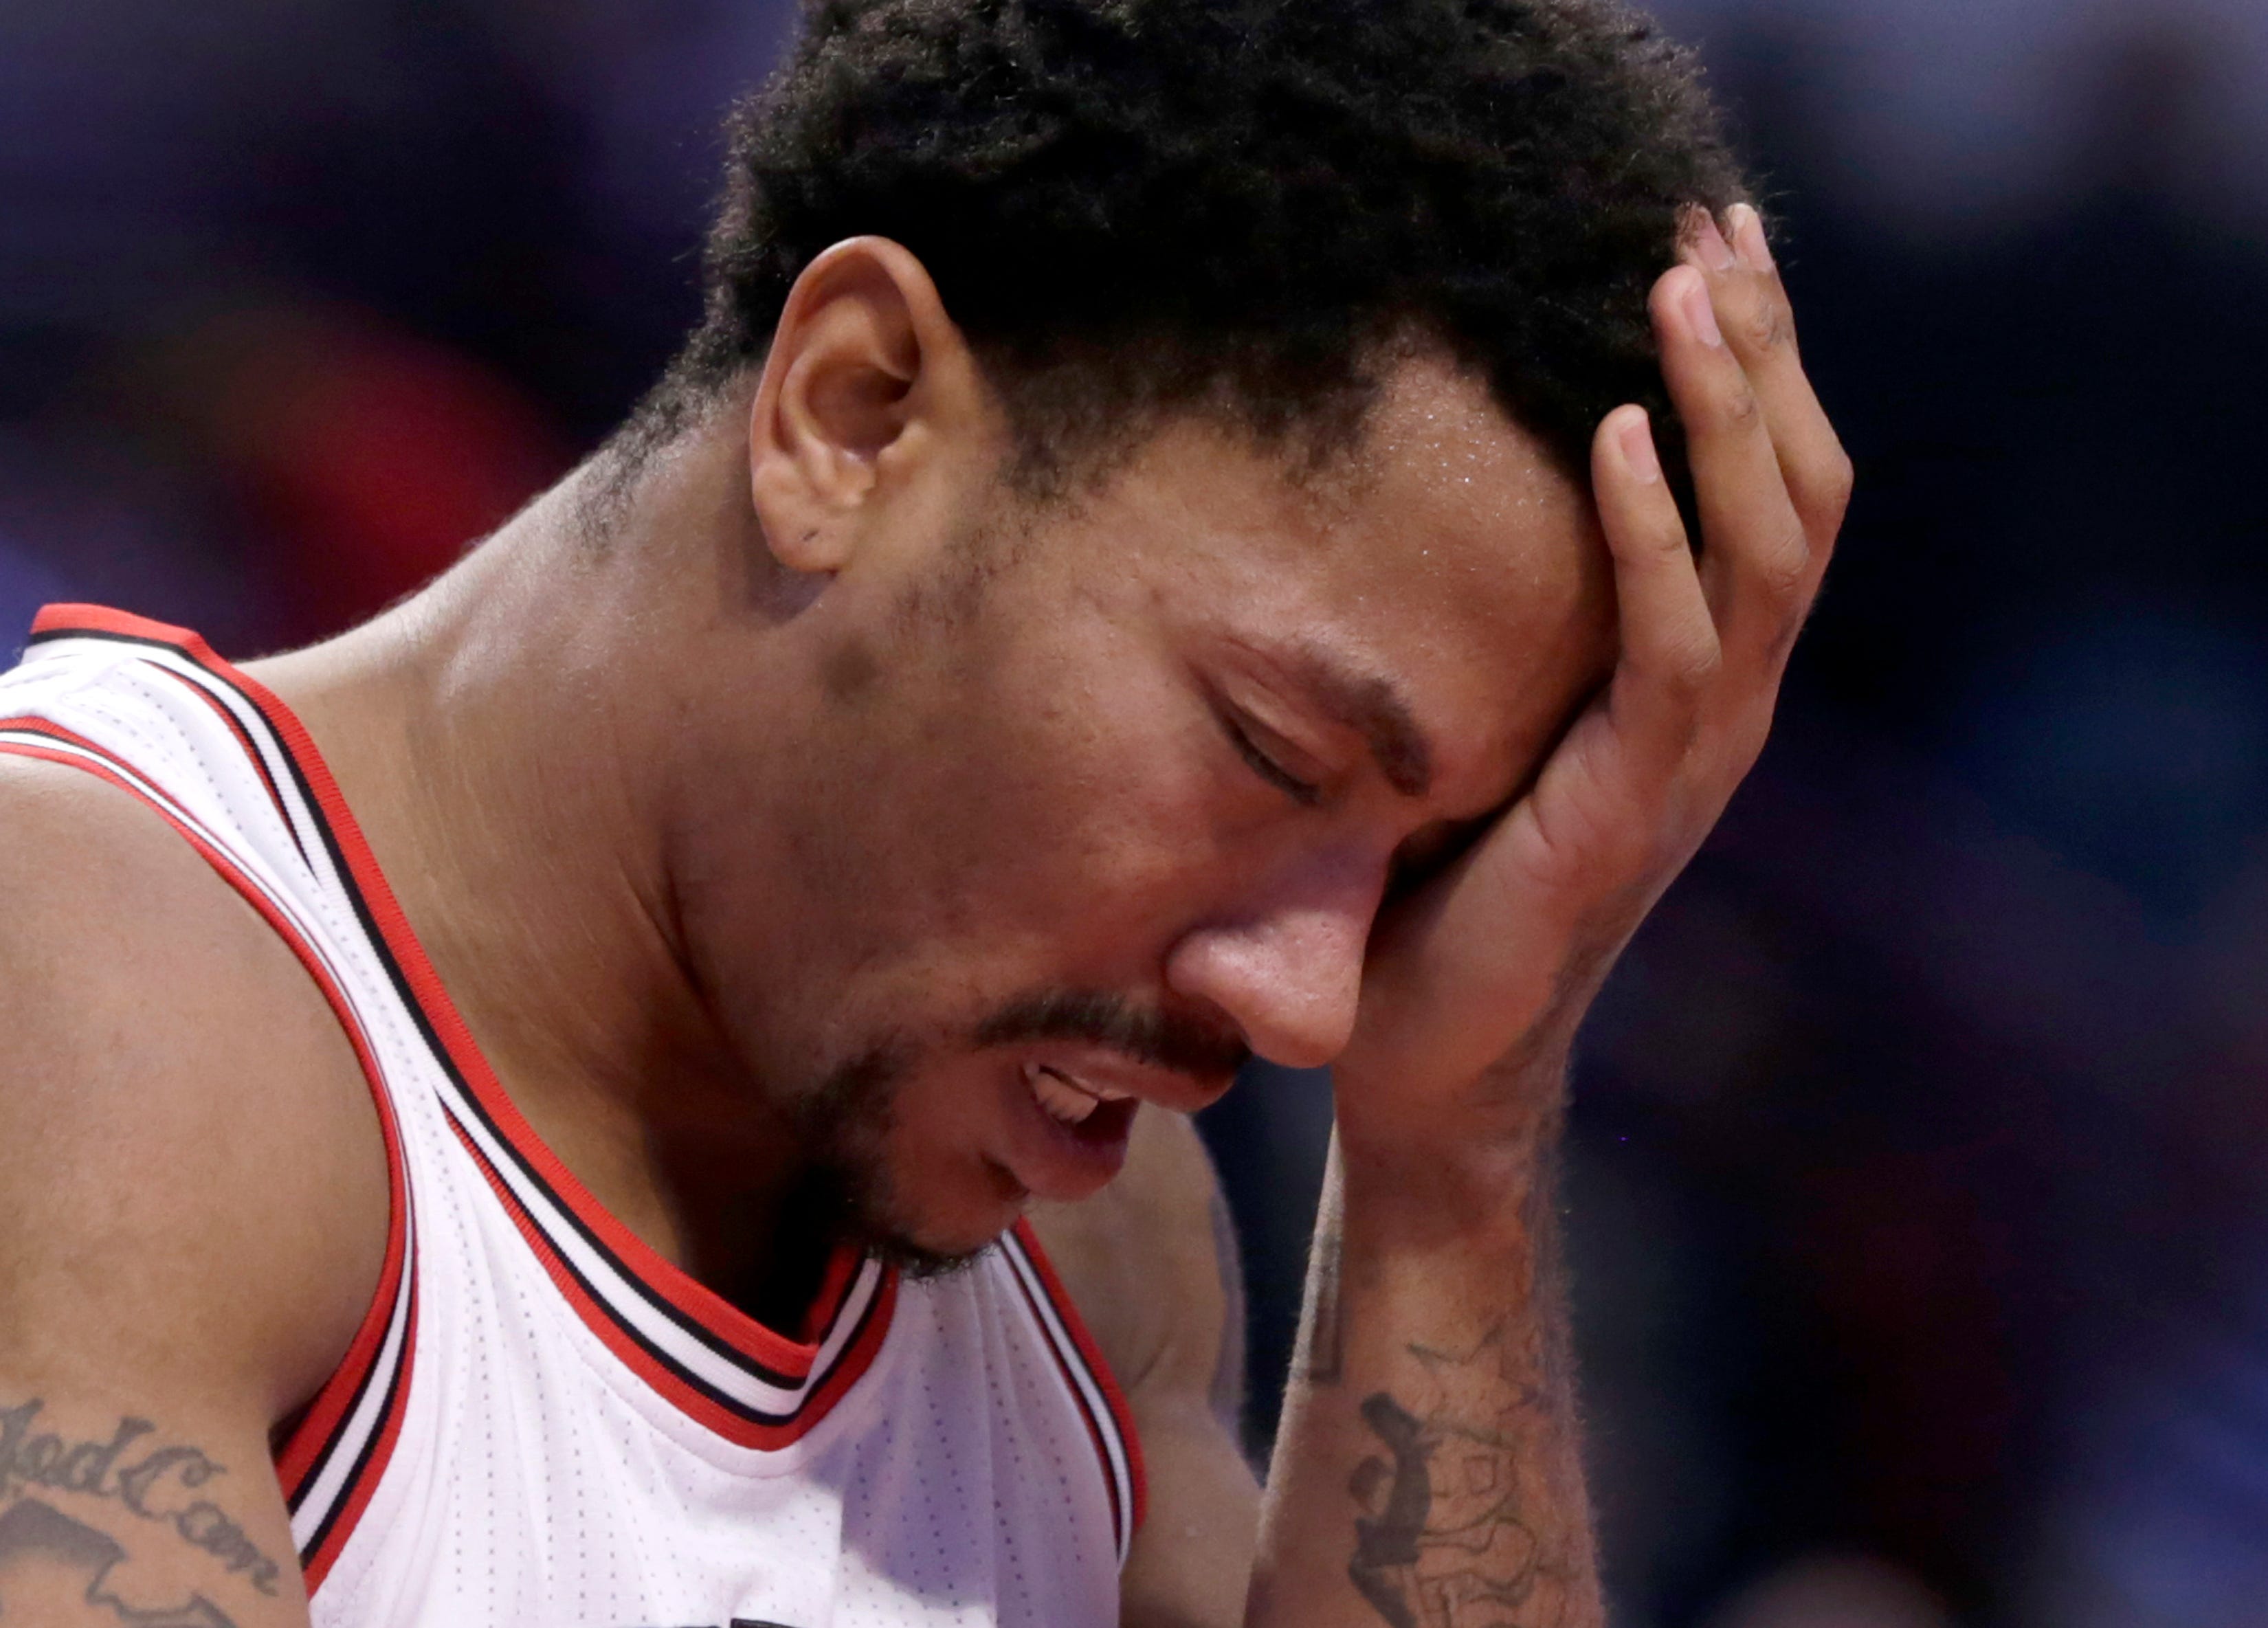 NBA changes stance on Kinesio tape after Derrick Rose speaks out